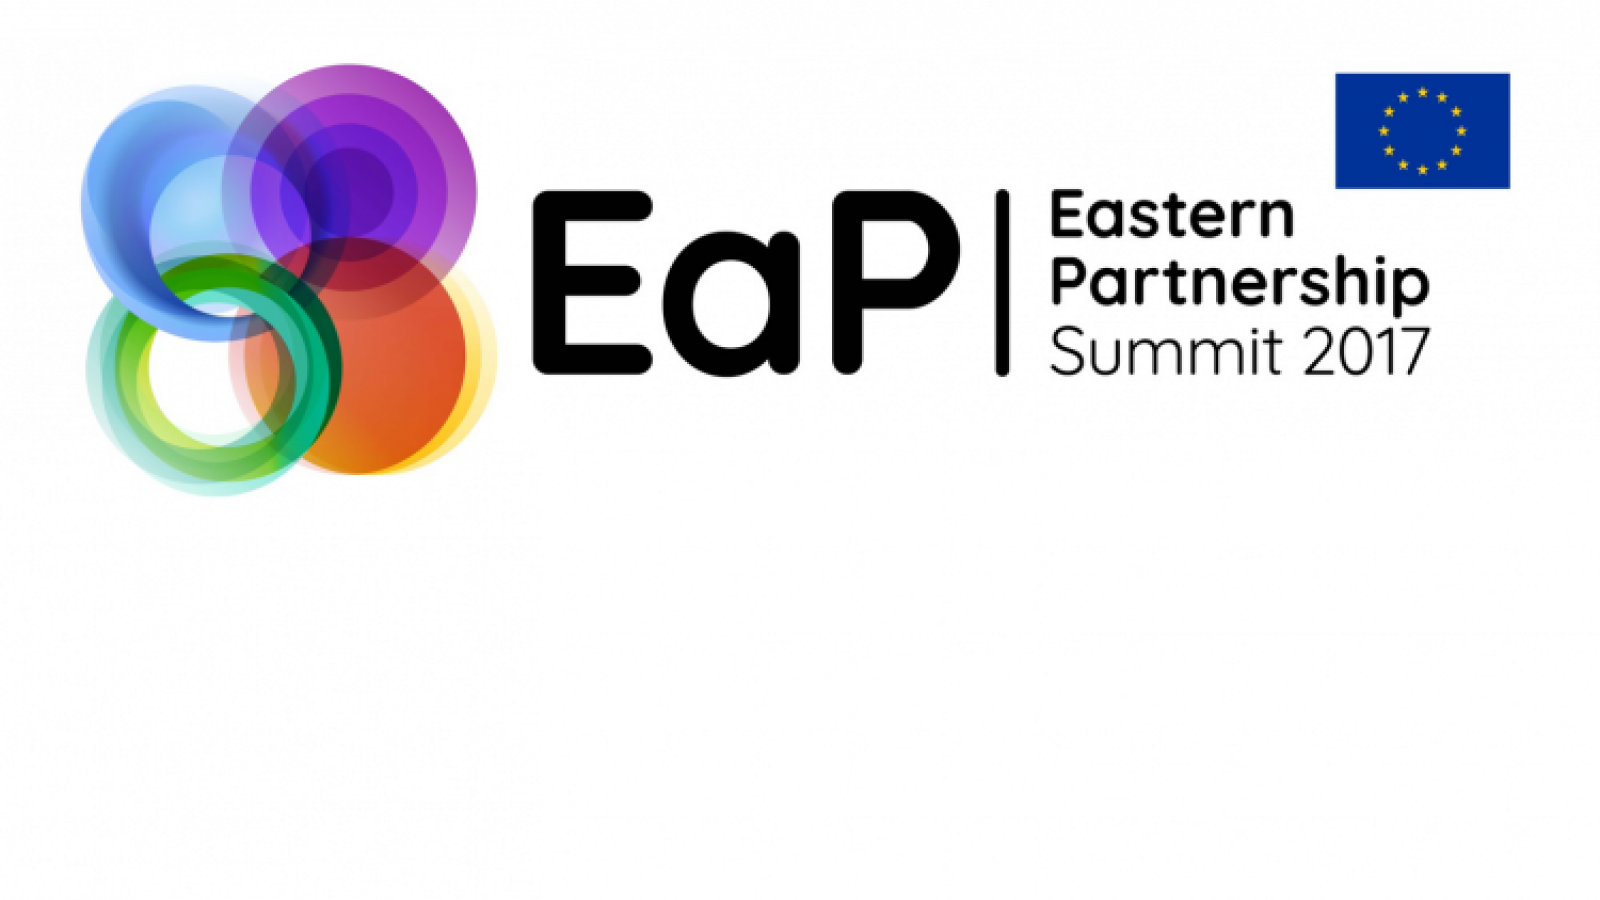 Revealing “myths” about the Eastern Partnership